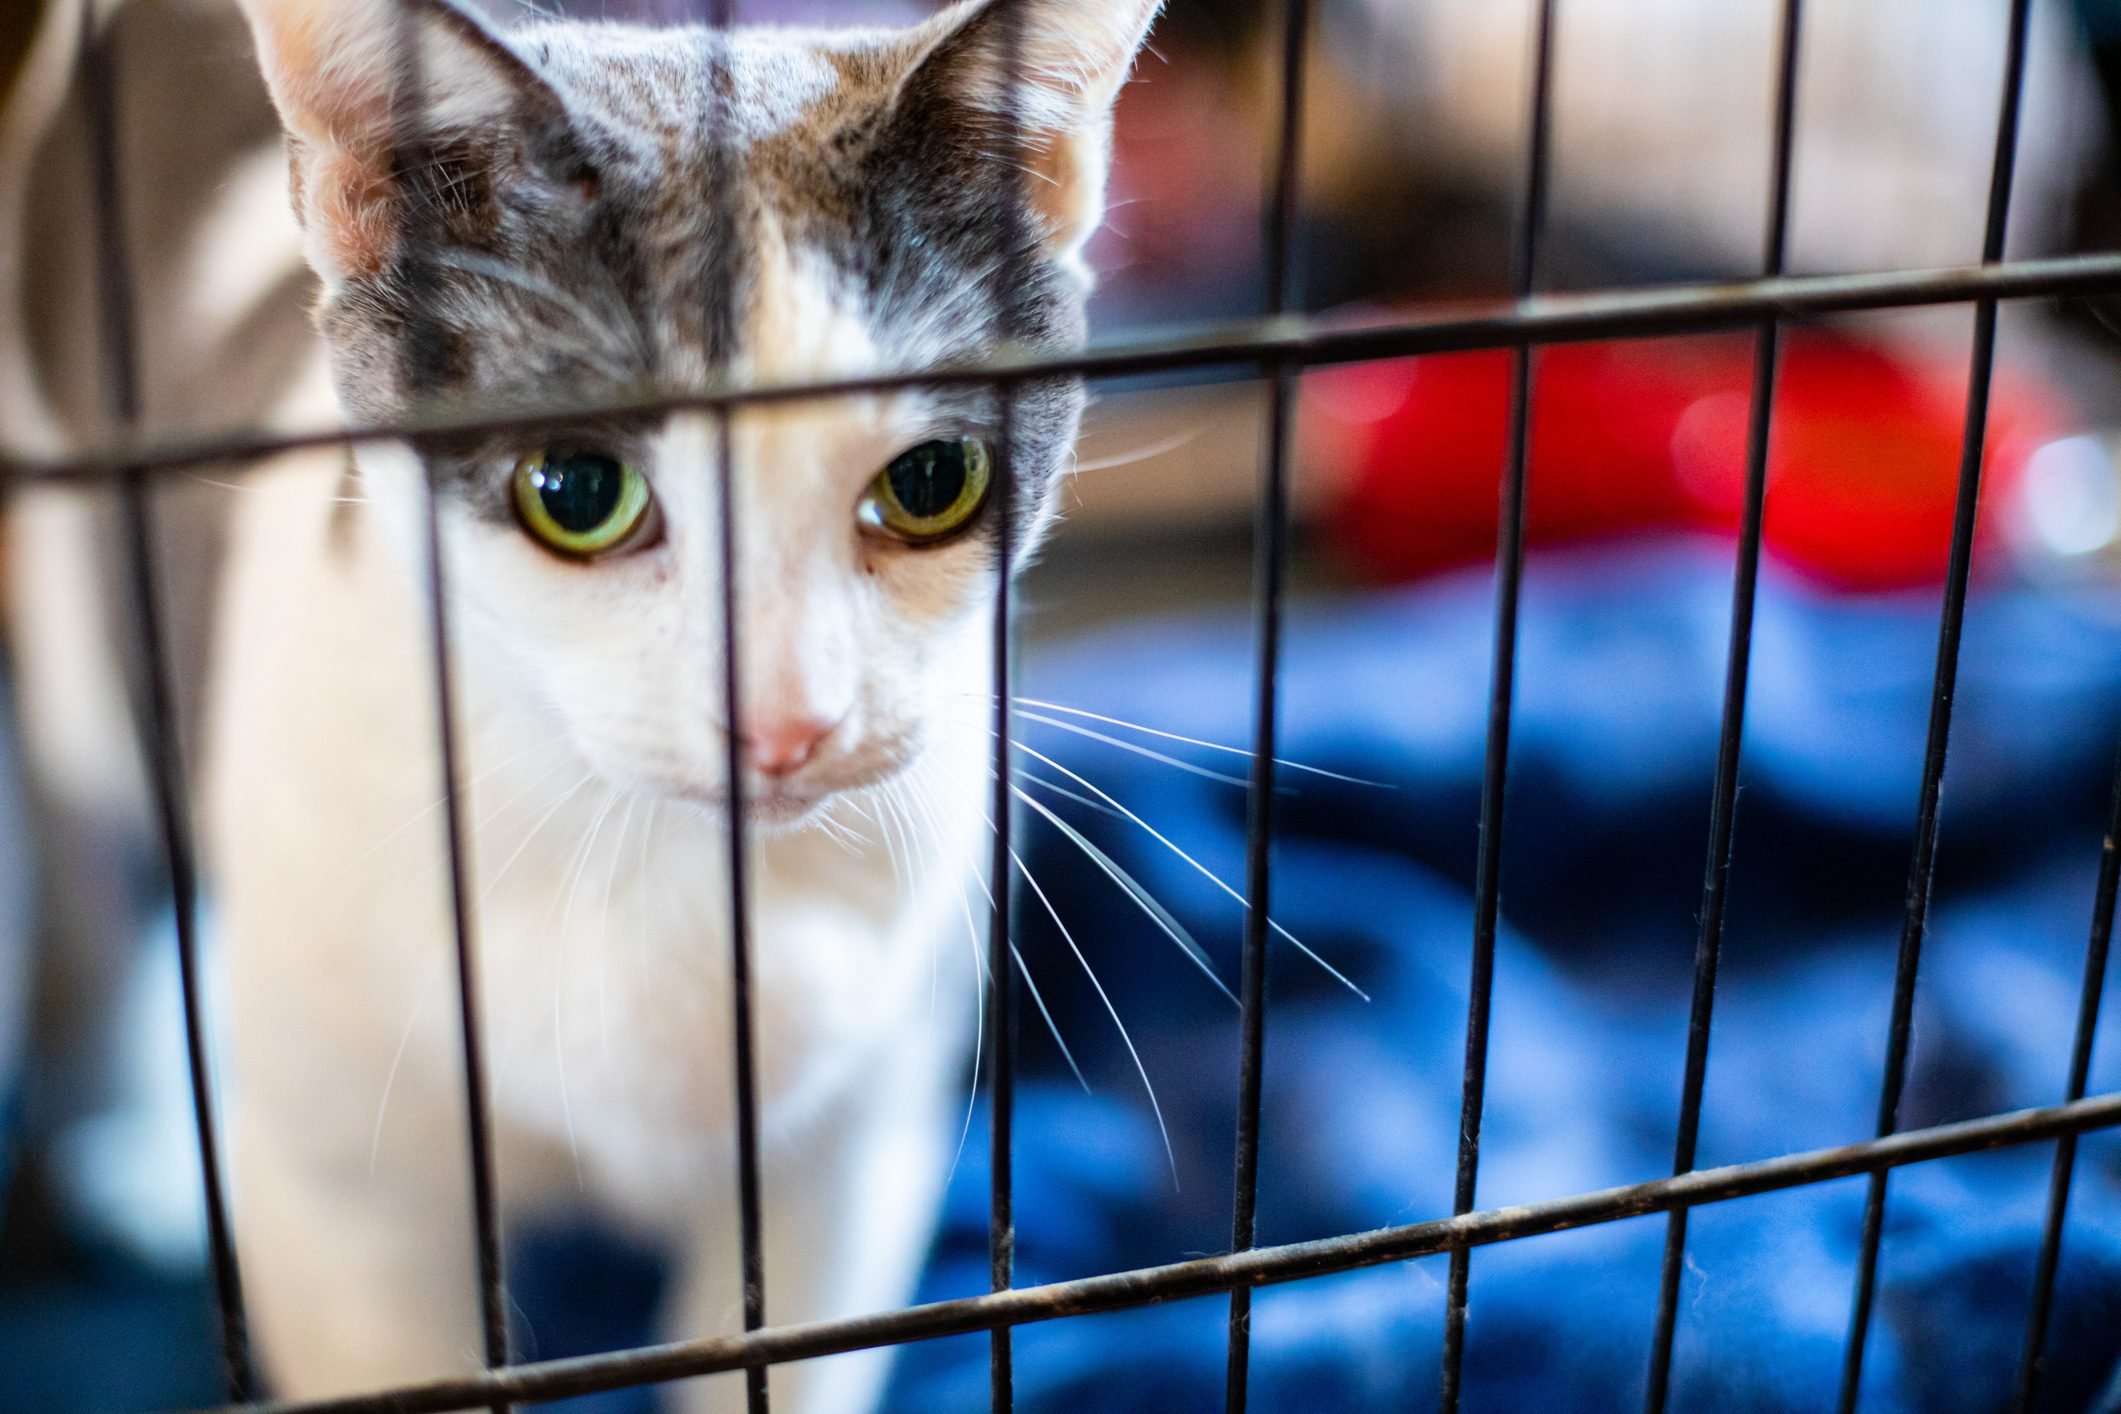 Cat in a Crate for Evacuation or Rescue - Family Pets Need Evacuation